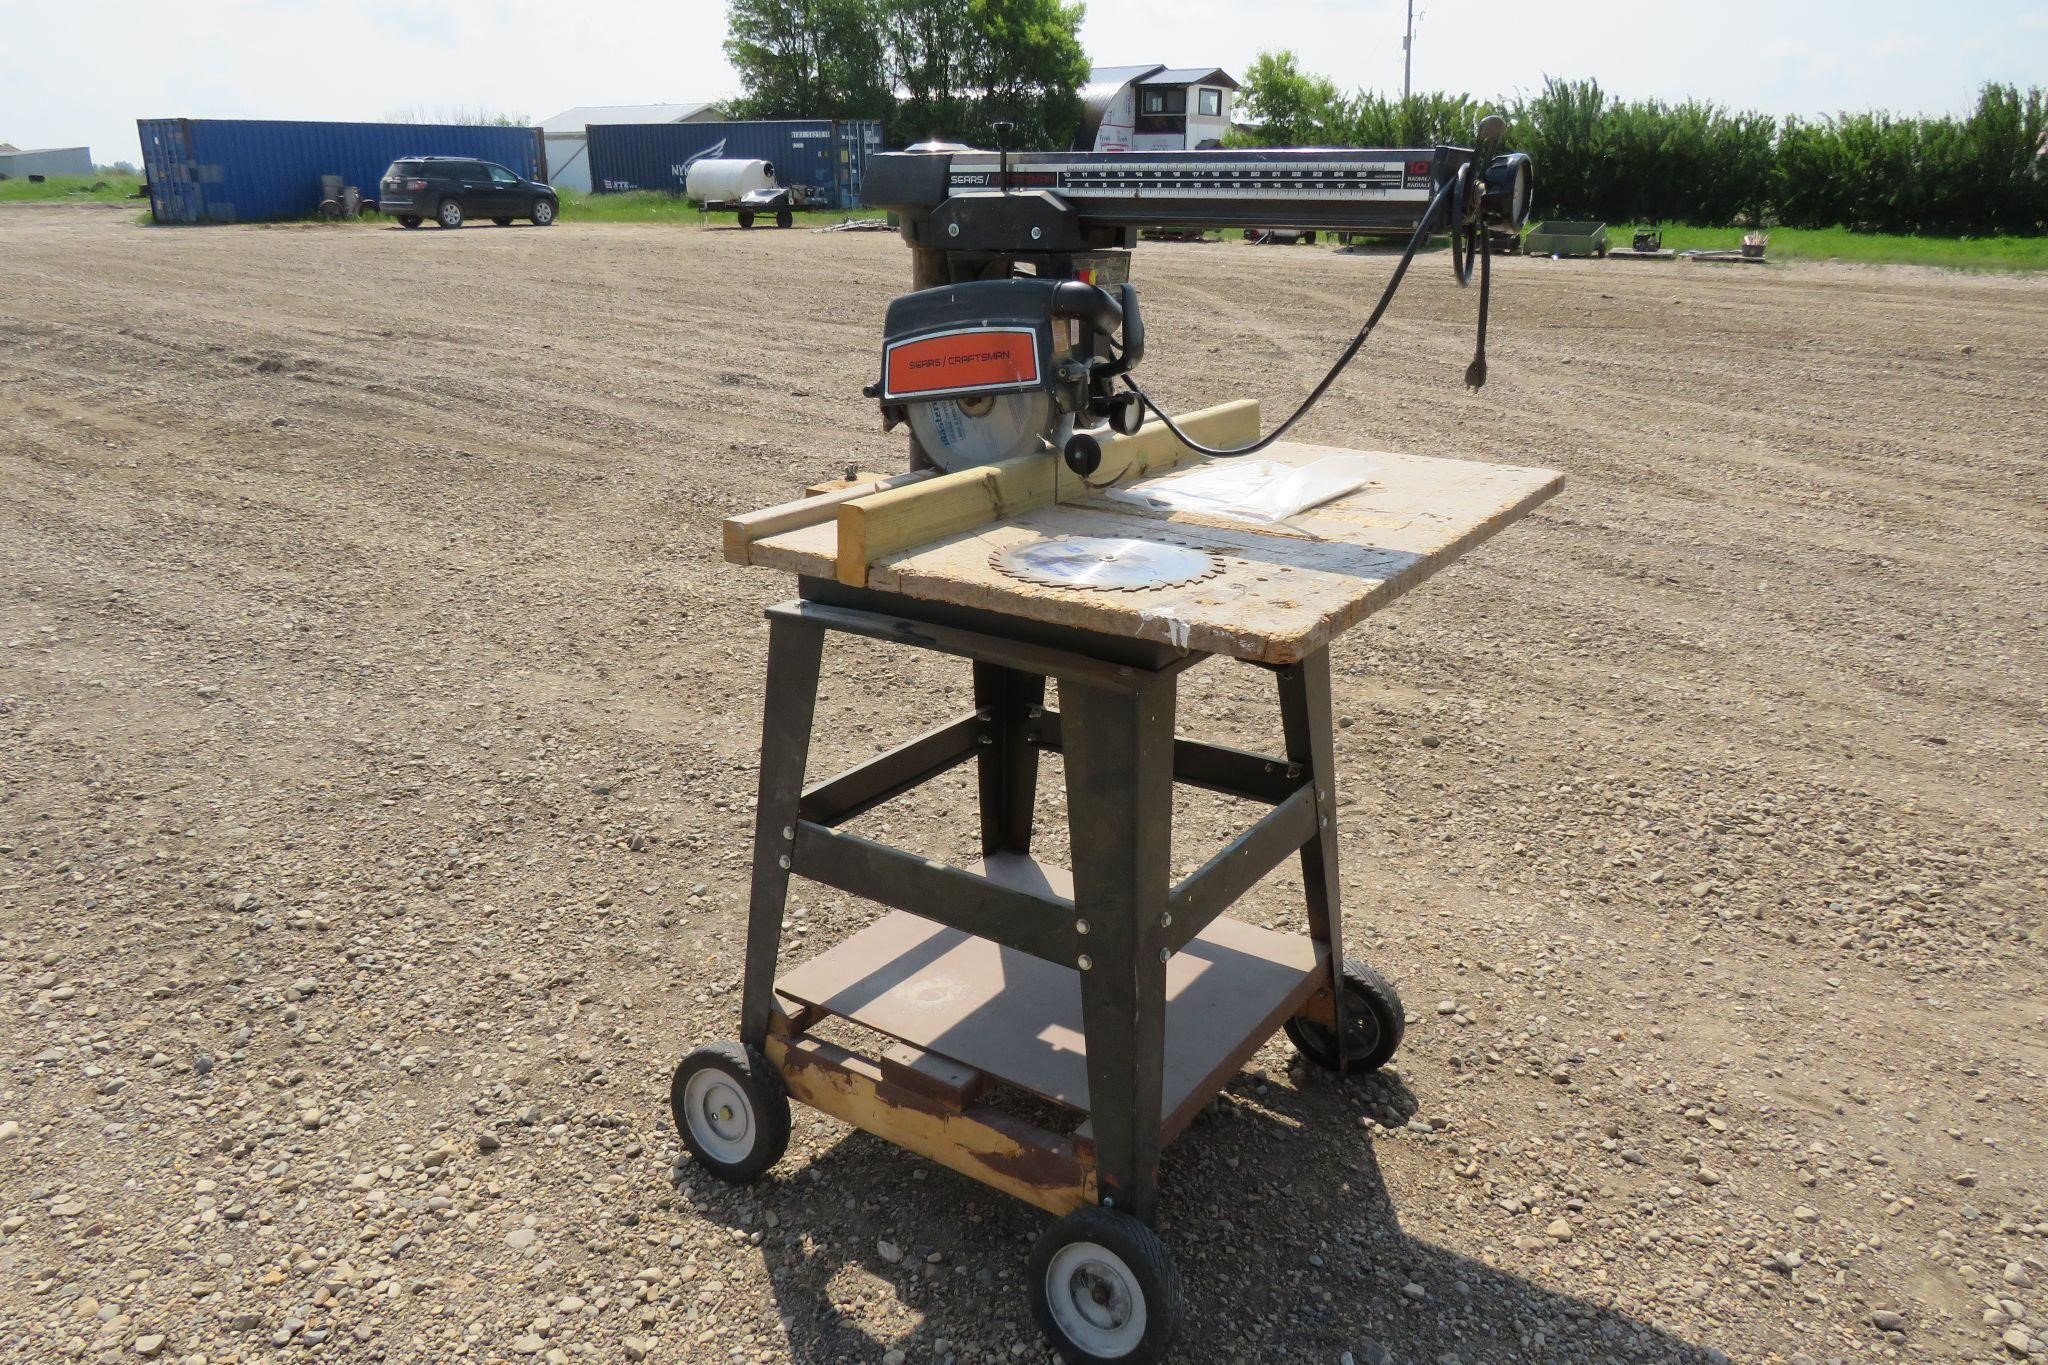 SEARS CRAFTSMAN 10" RADIAL ARM SAW ON ROLLERS